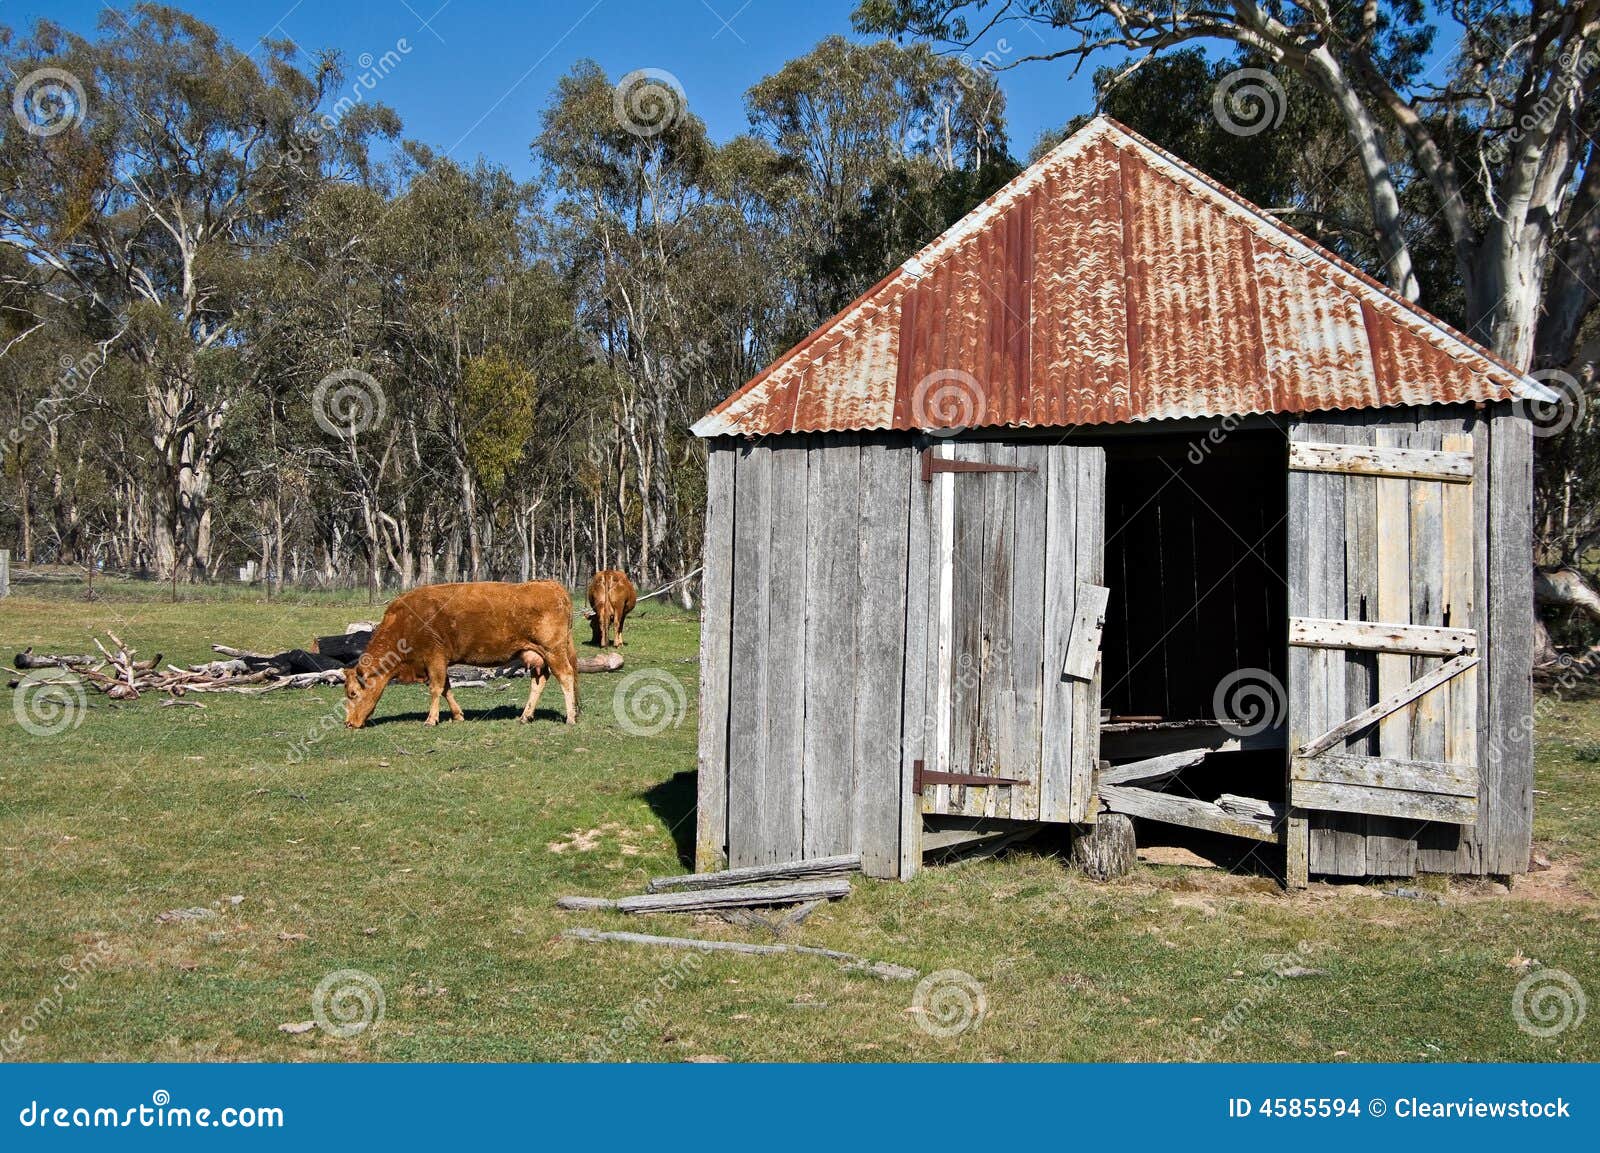 Old Wooden Farm Hut Stock Images - Image: 4585594